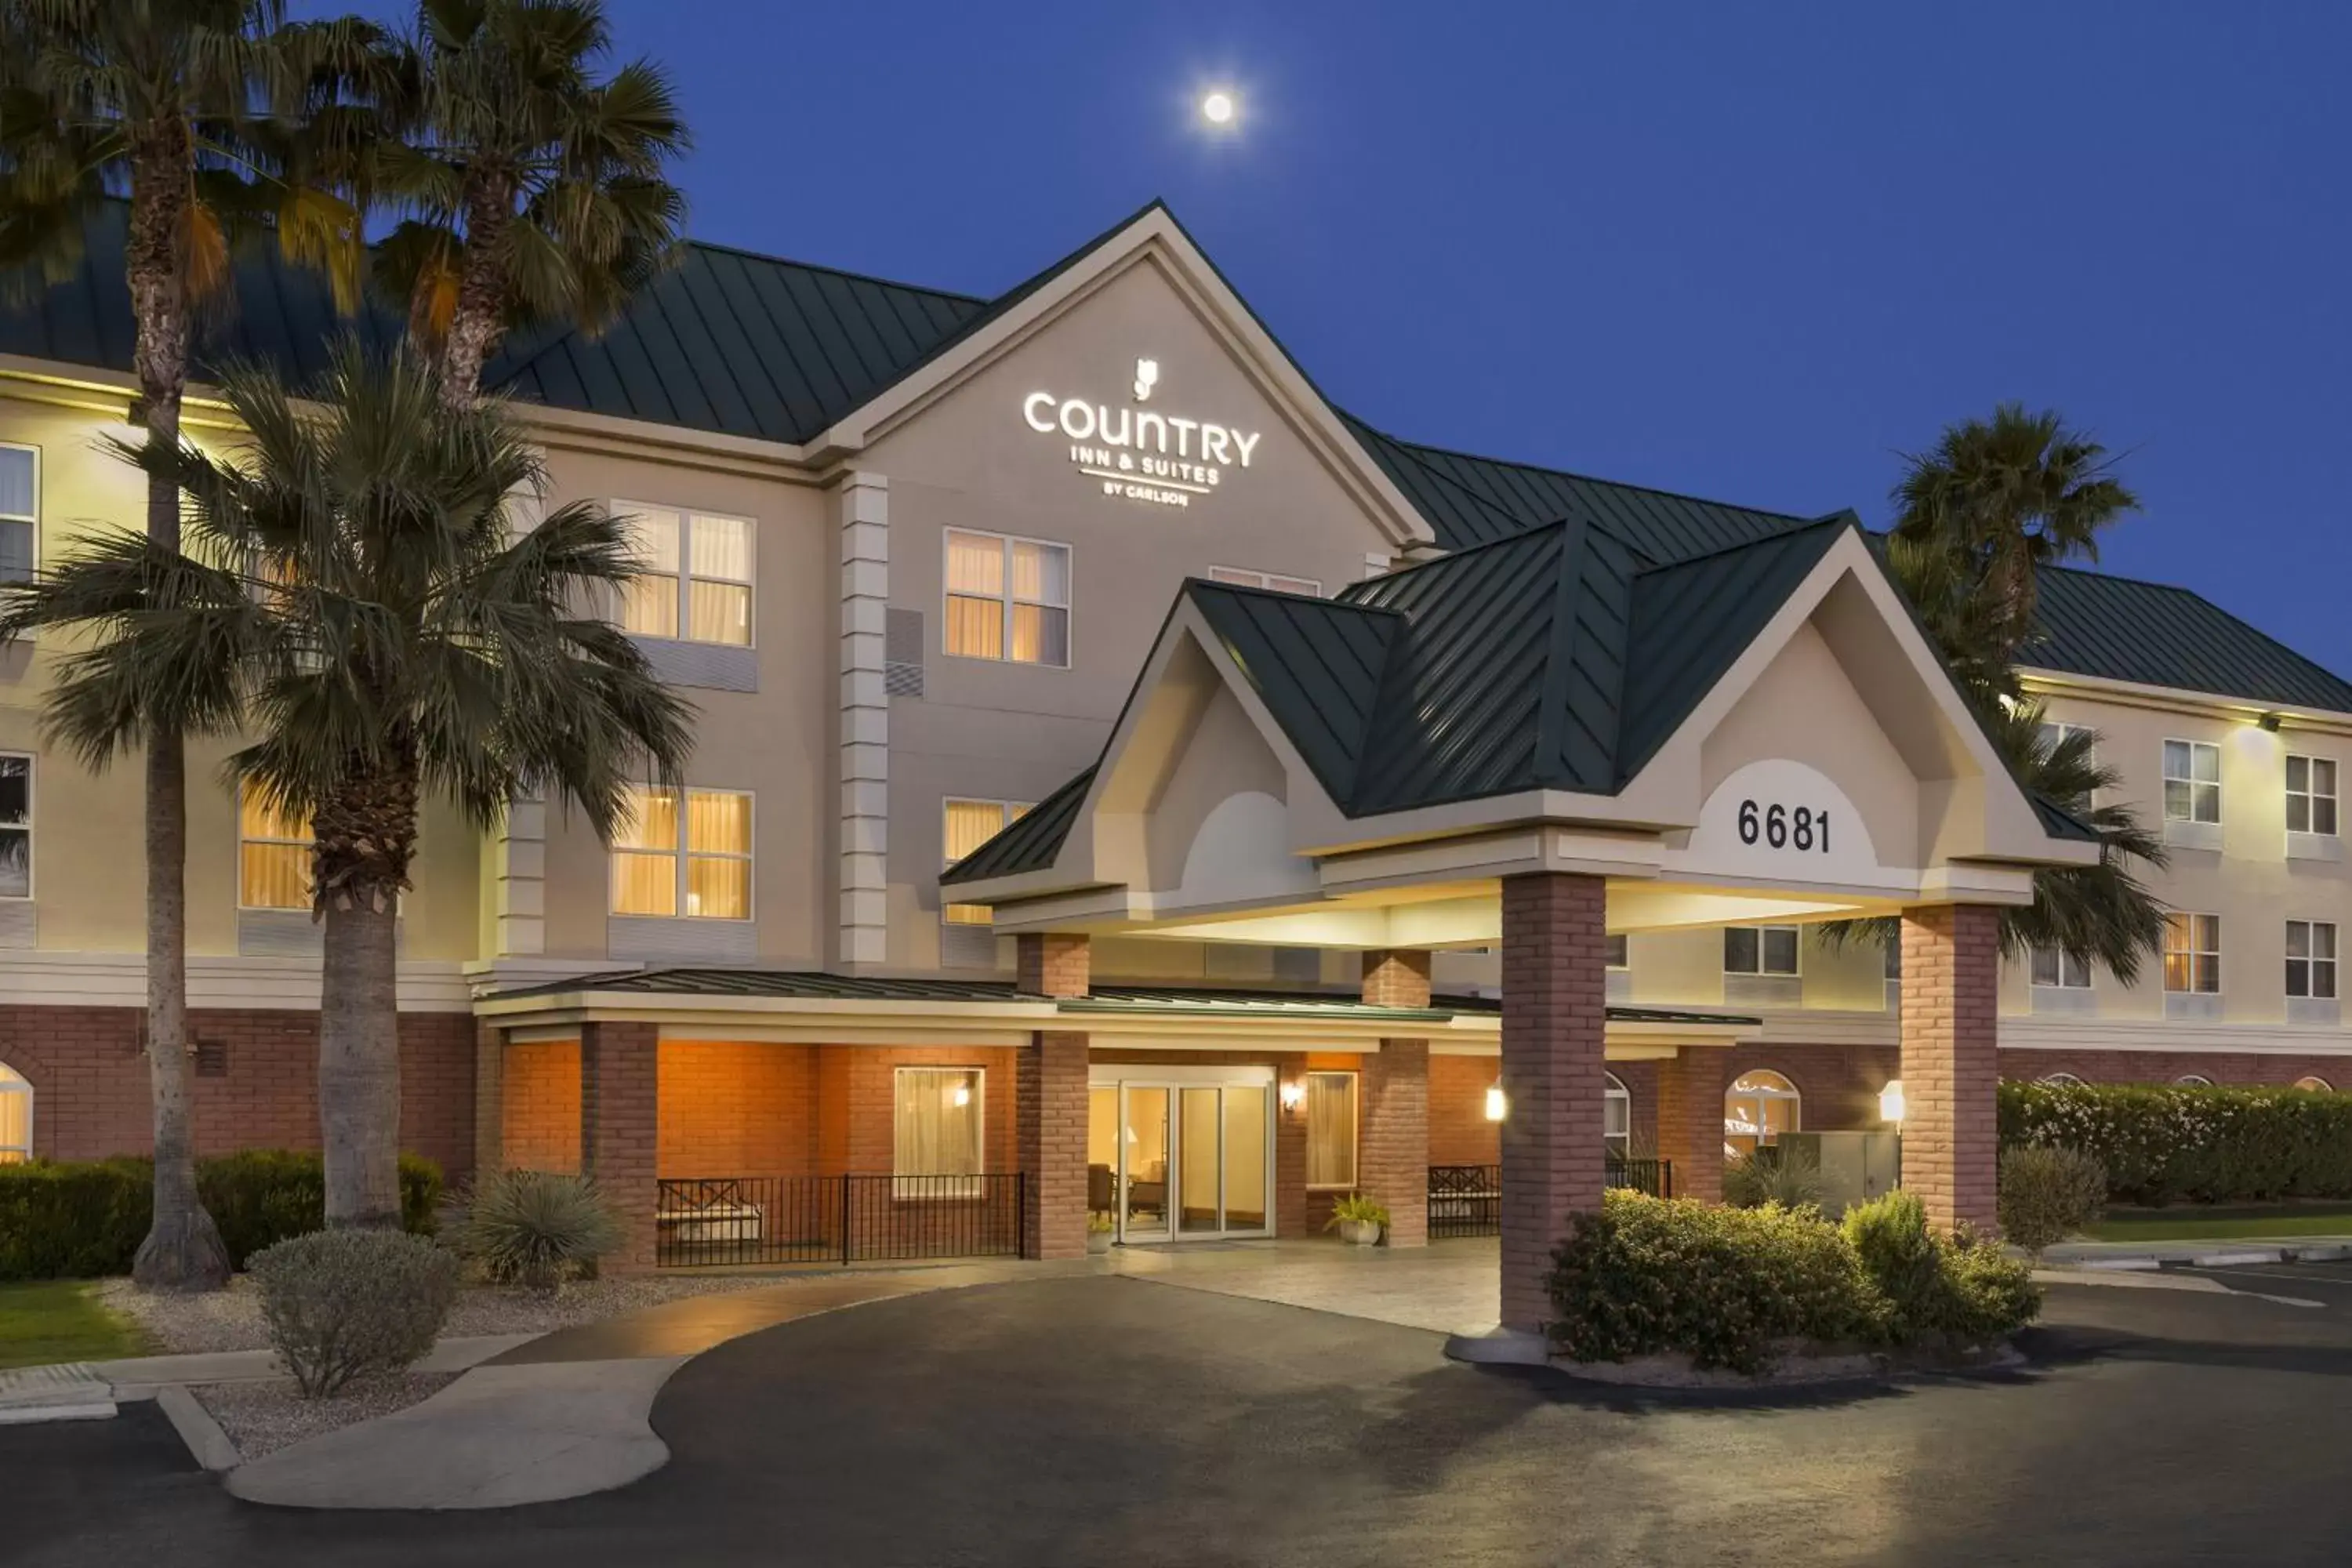 Facade/entrance, Property Building in Country Inn & Suites by Radisson, Tucson Airport, AZ